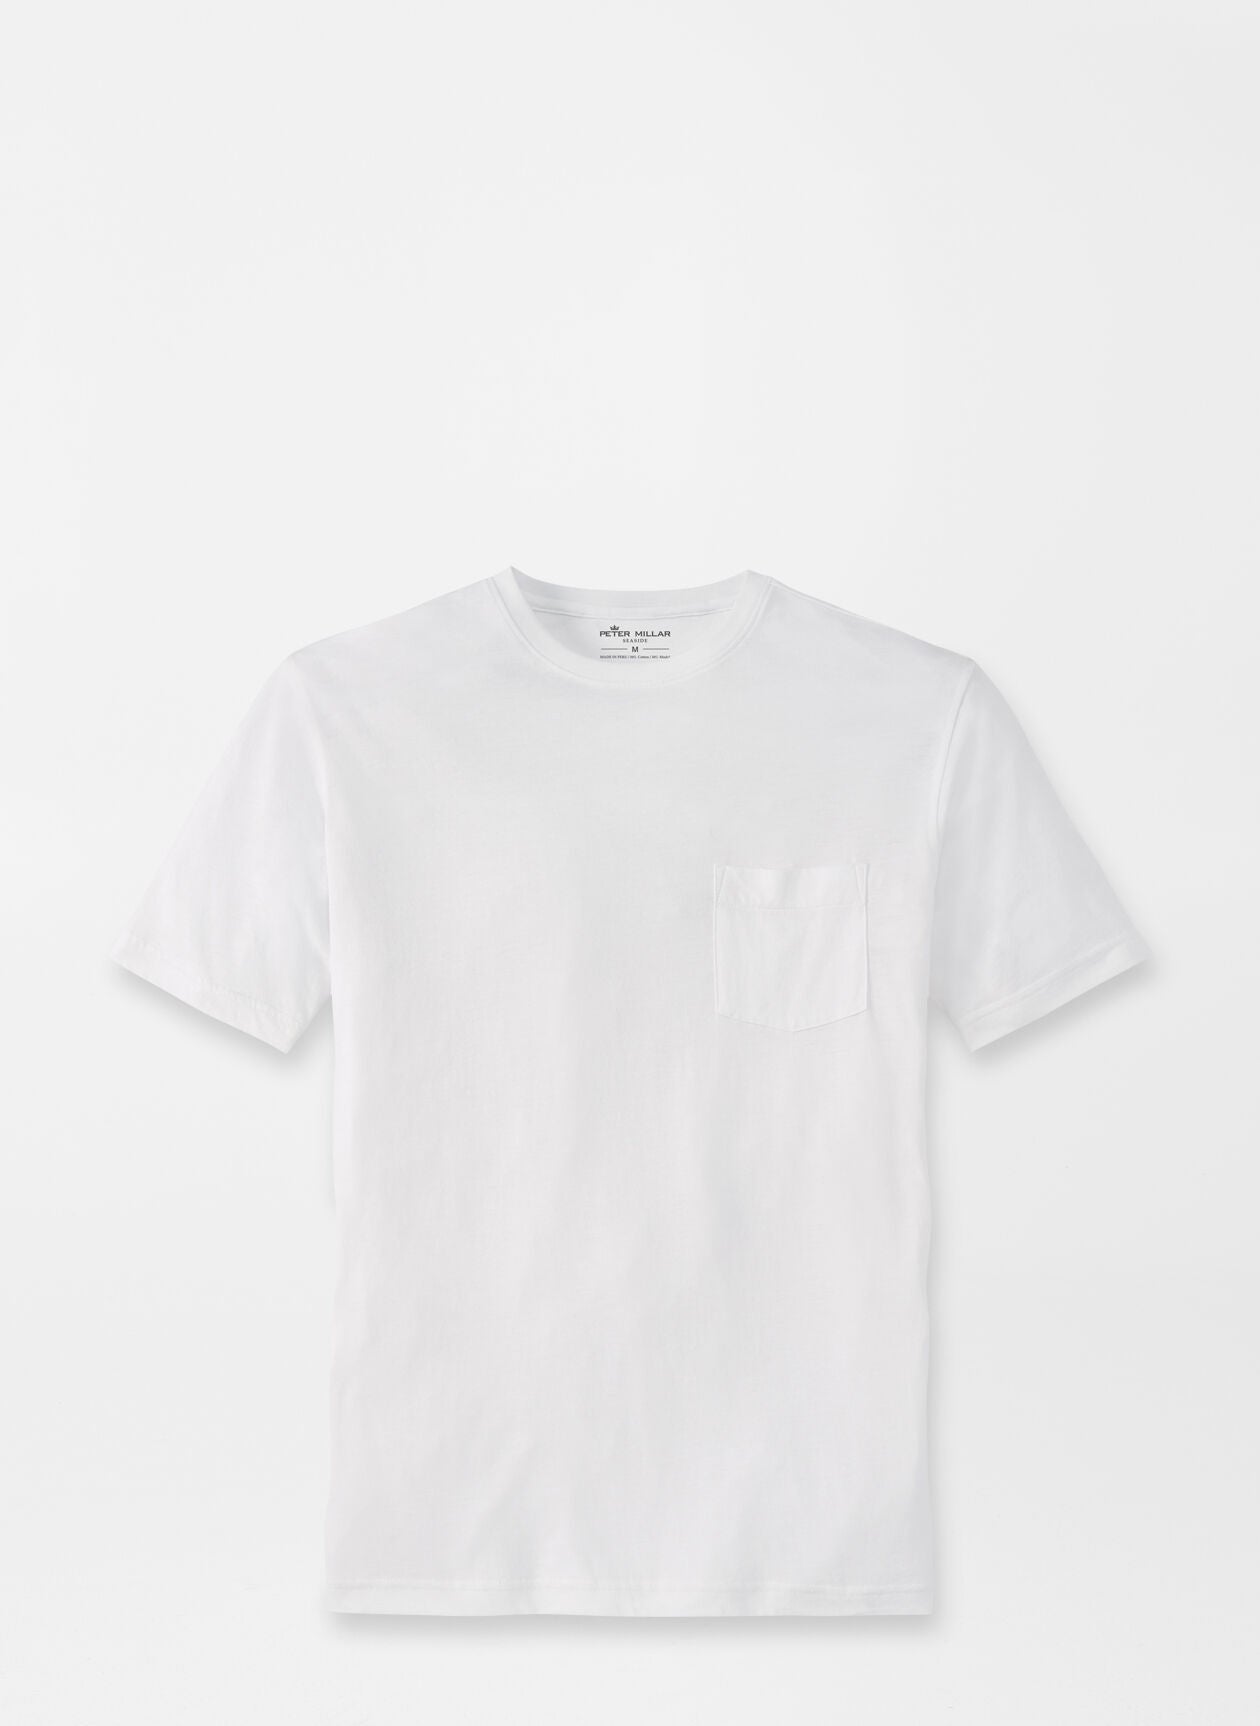 Seaside Summer Soft Pocket Tee- Two Colors